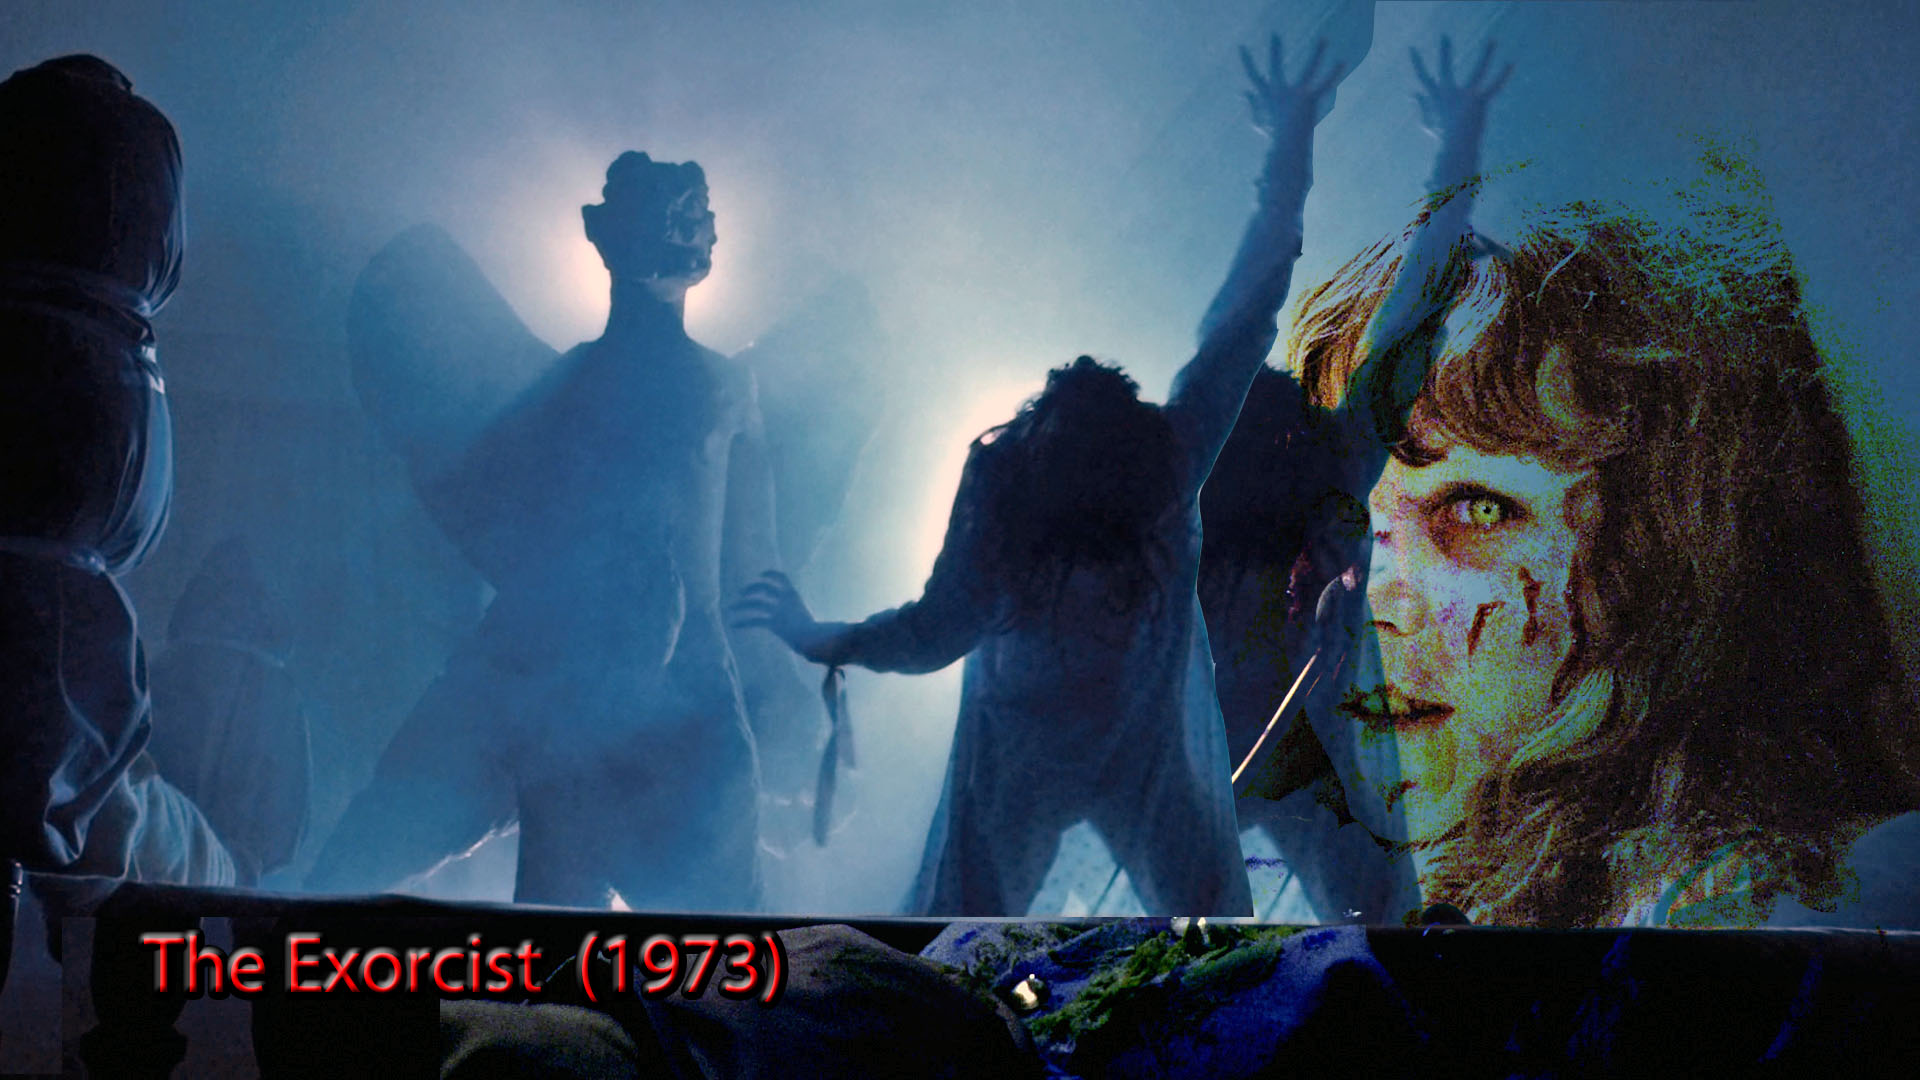 The Exorcist 1973 - Horror Movies Wallpaper (36672132) - Fanpop